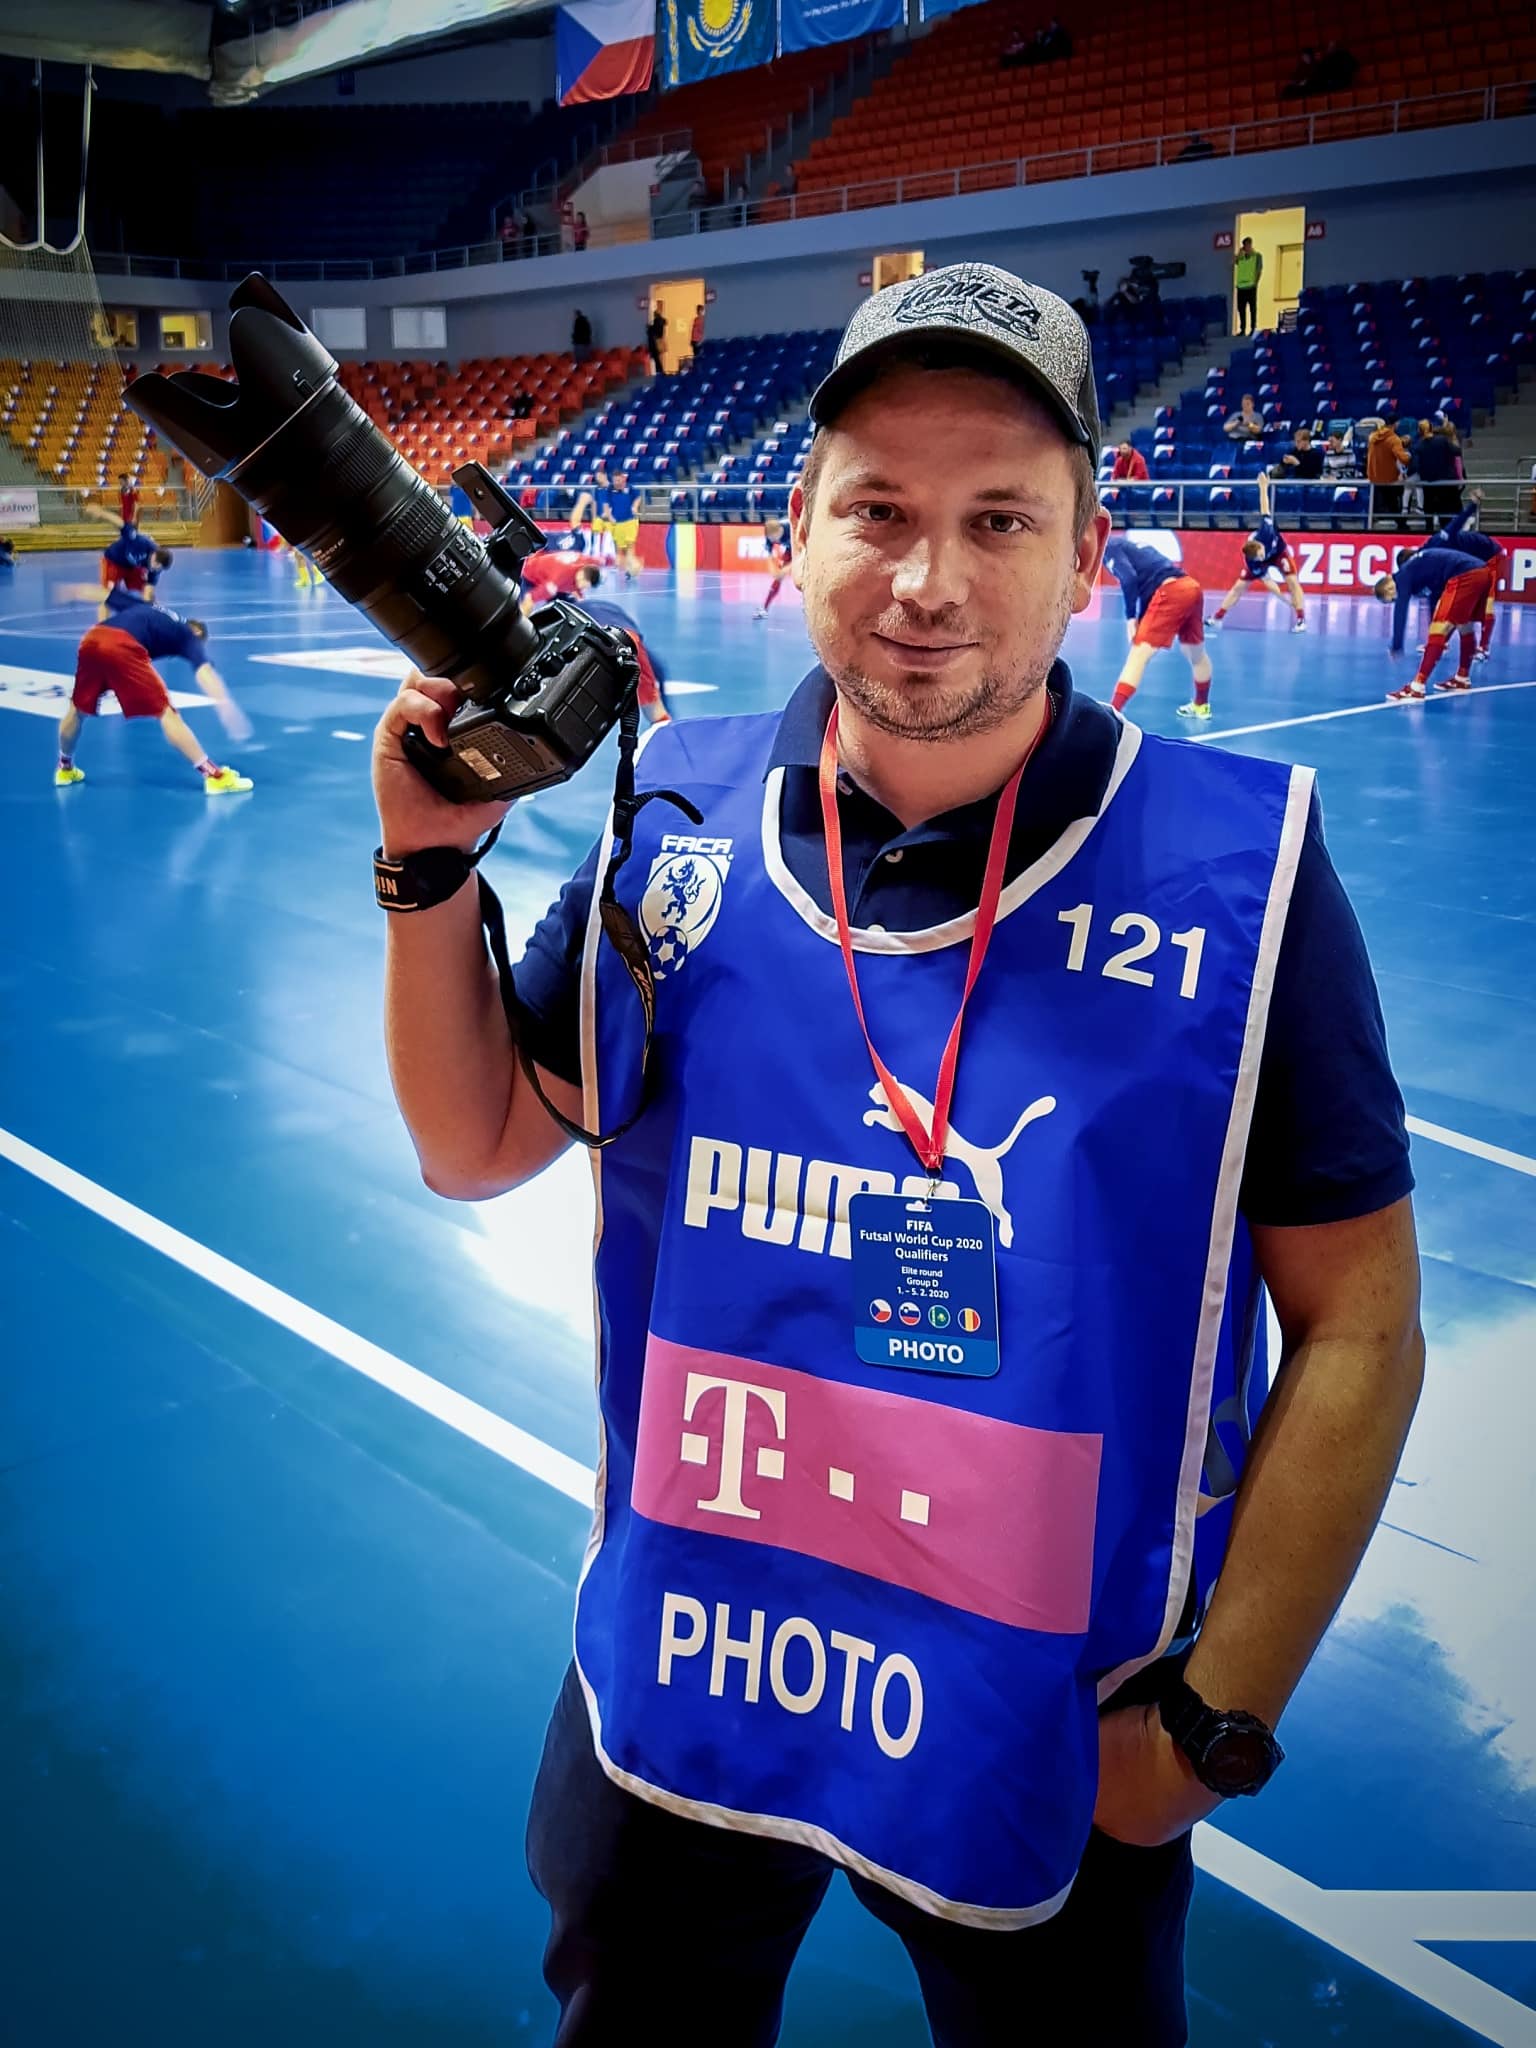 How to photograph in the sports hall: dress properly and cover your camera